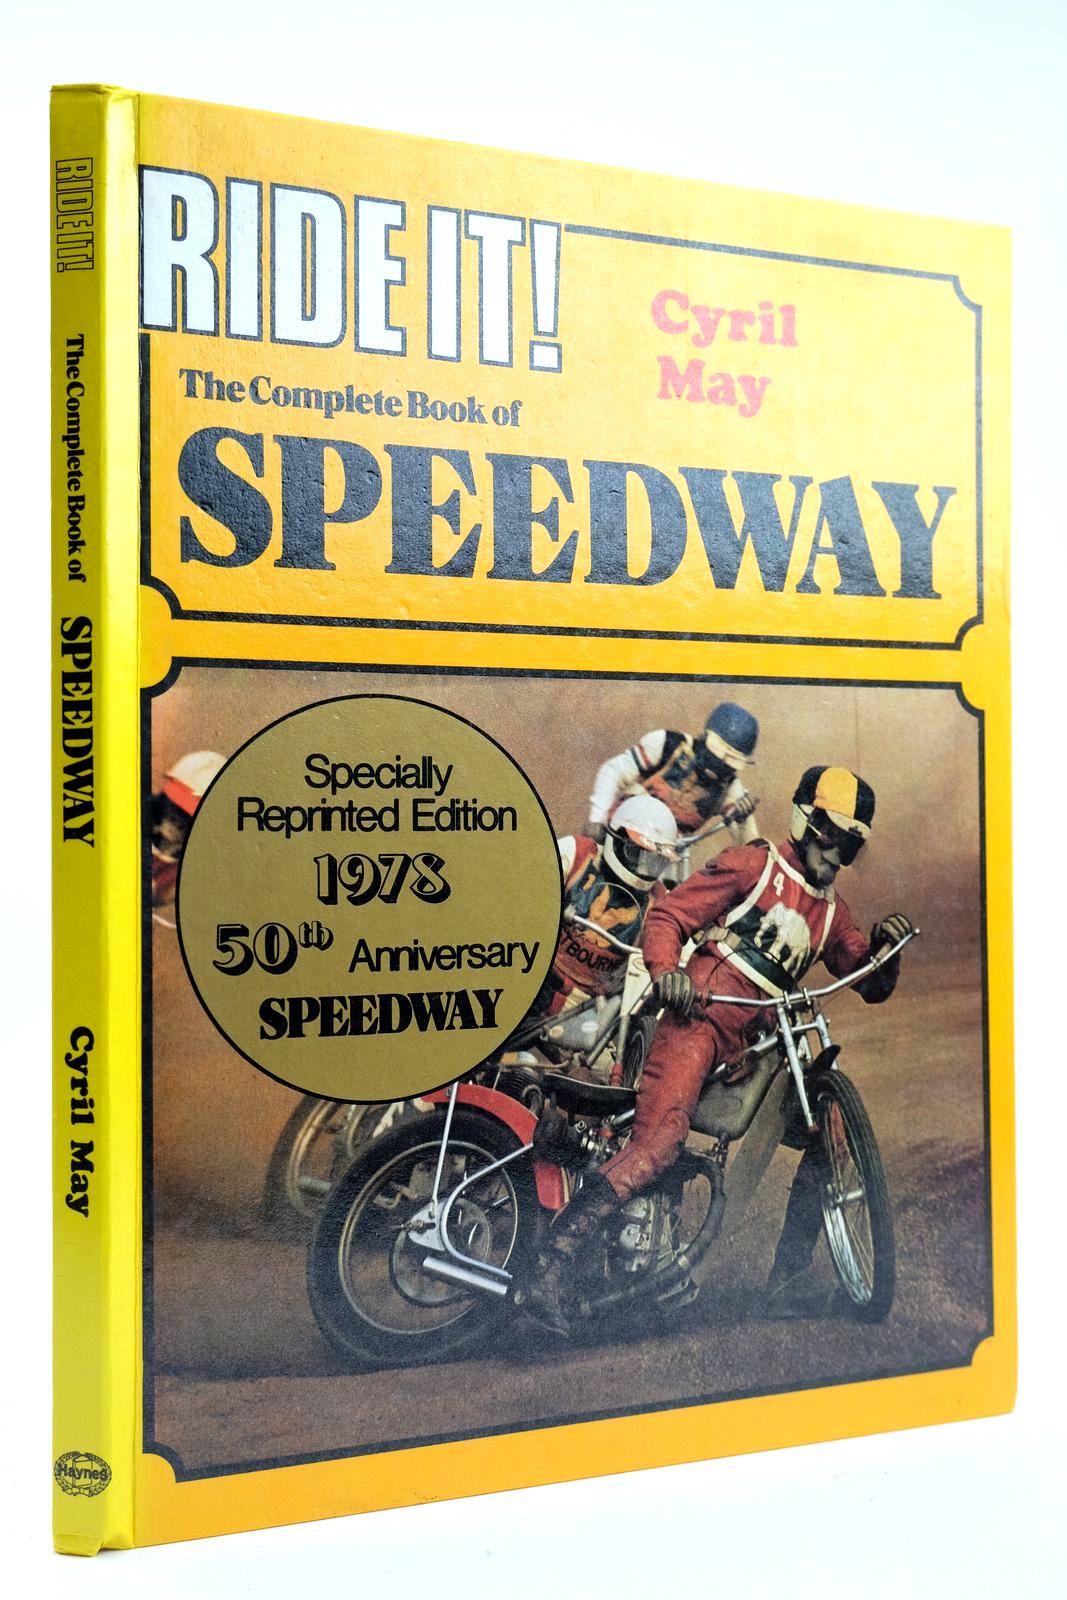 Photo of RIDE IT! THE COMPLETE BOOK OF SPEEDWAY written by May, Cyril published by Haynes Publishing Group (STOCK CODE: 2132277)  for sale by Stella & Rose's Books